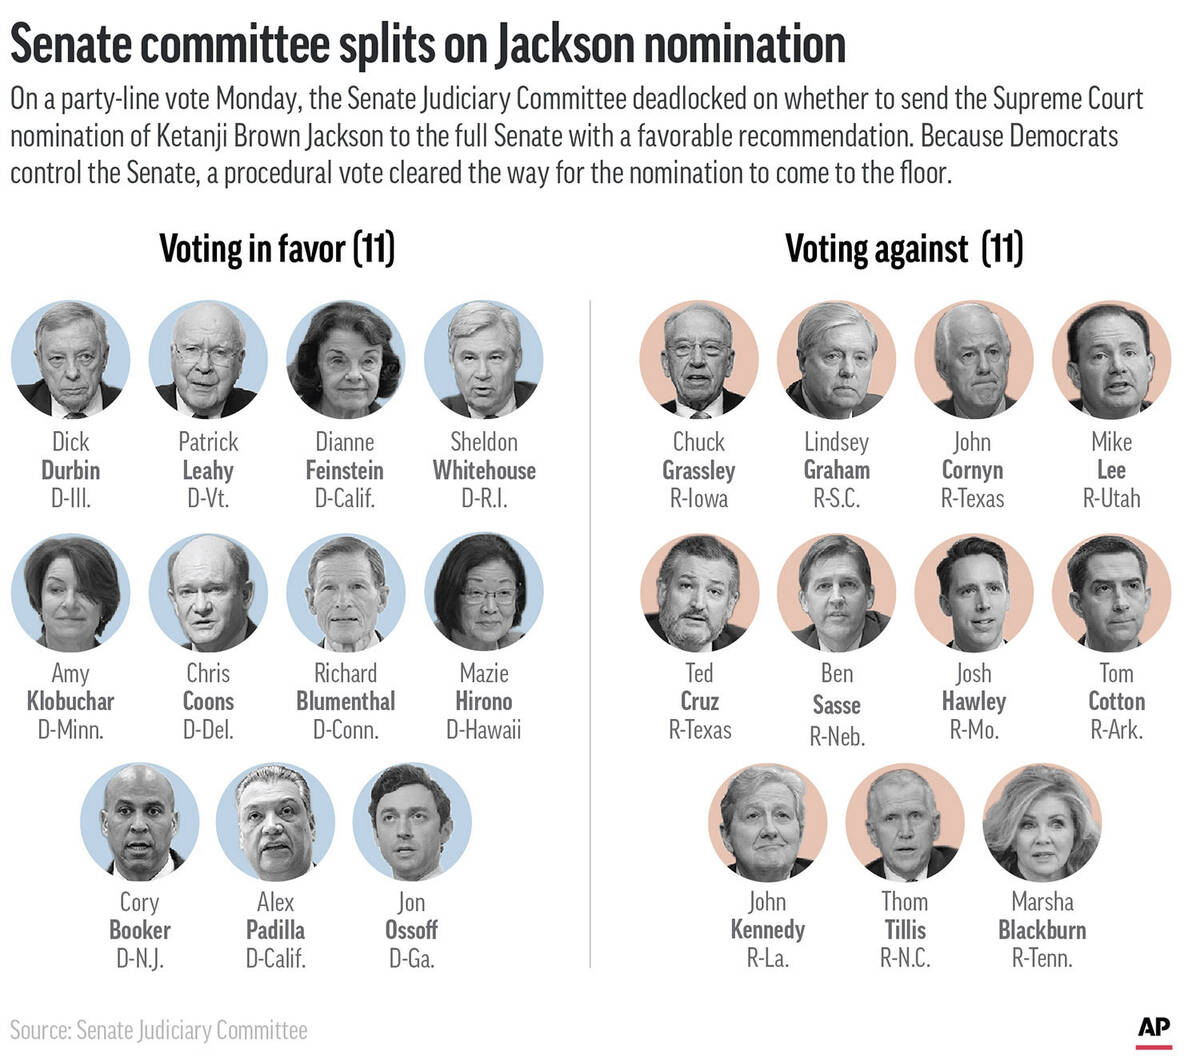 The evenly-divided Senate Judiciary Committee tied on advancing the Supreme Court nomination of ...